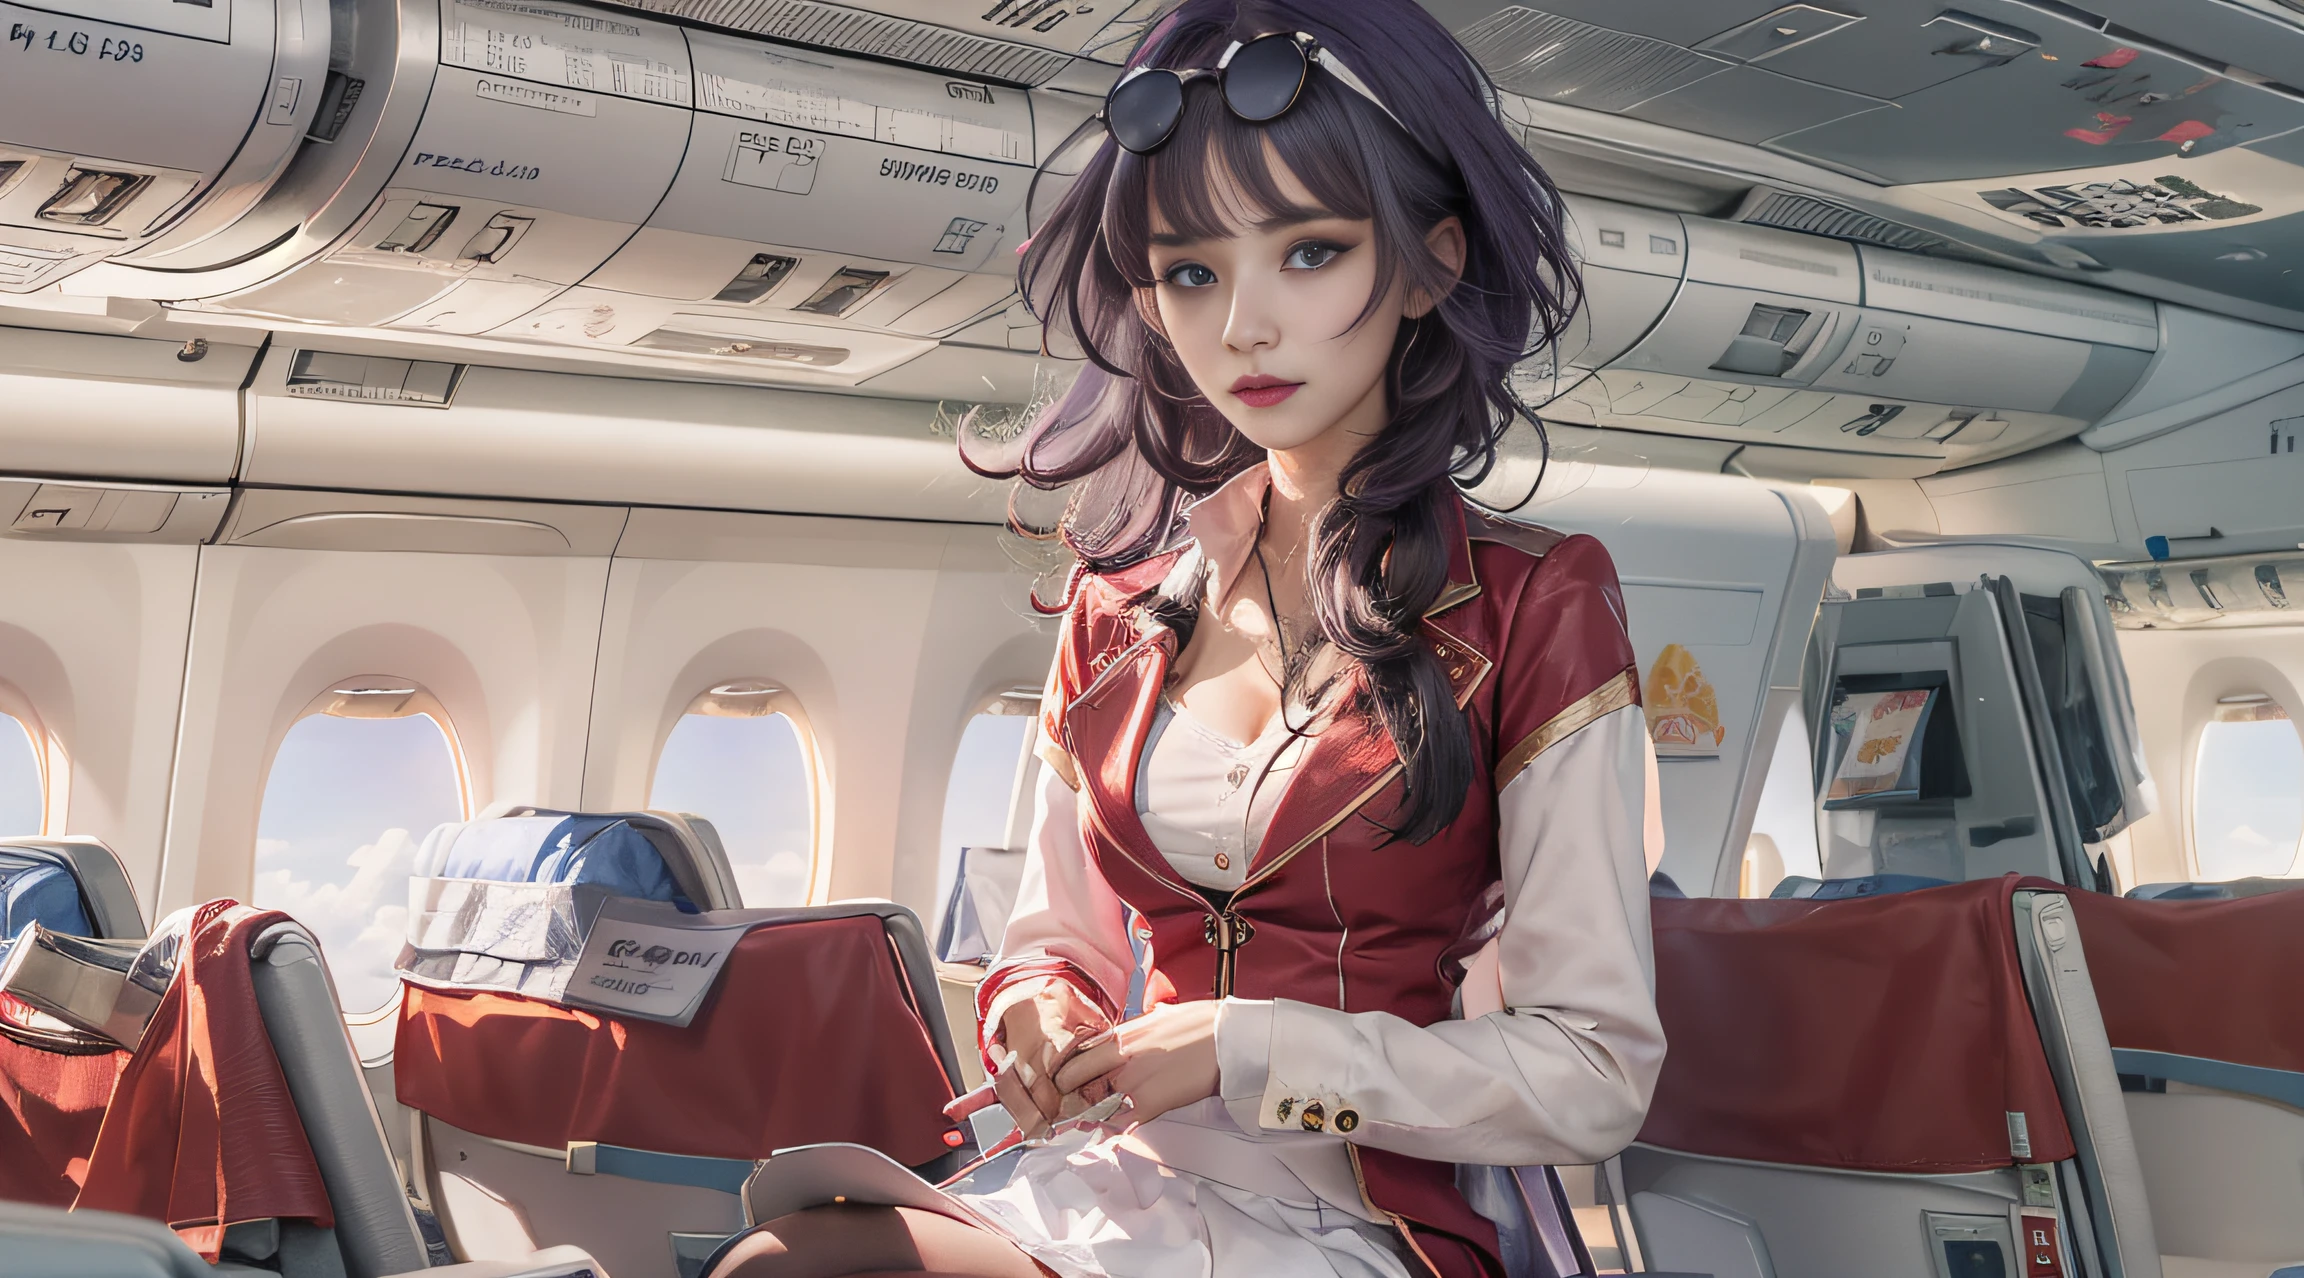 (Best quality: 1.1), (Realistic: 1.1), (Photography: 1.1), (highly details: 1.1), (1womanl), Airline flight attendants,Red coat,White shirt,Short skirt,black lence stockings,bent down,In the plane,KafkaHKS,Hong Kong,Purple eyes, Purple hair, eyewear on head, ,Large breasts,